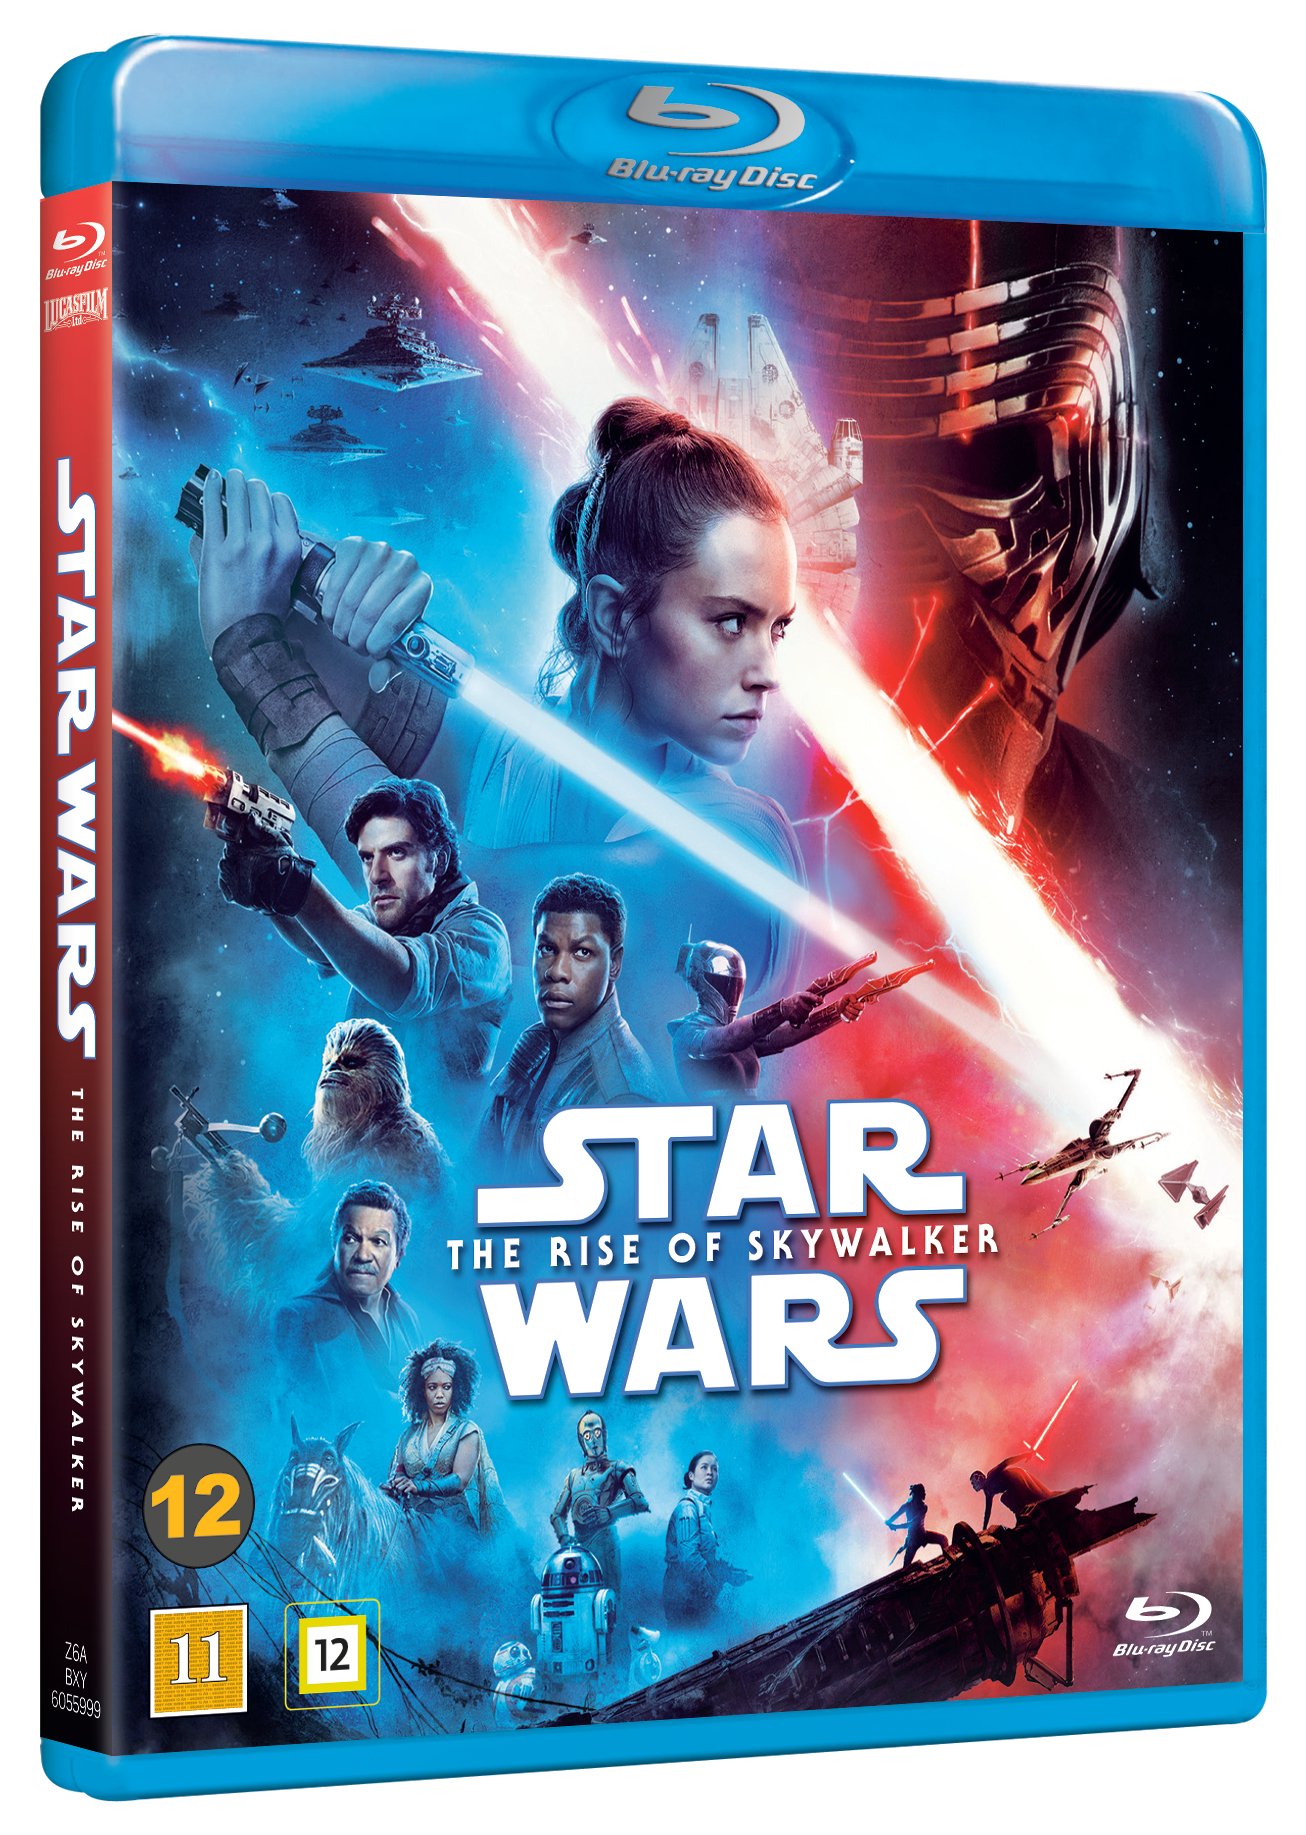 Star Wars: The Rise of Skywalker download the new